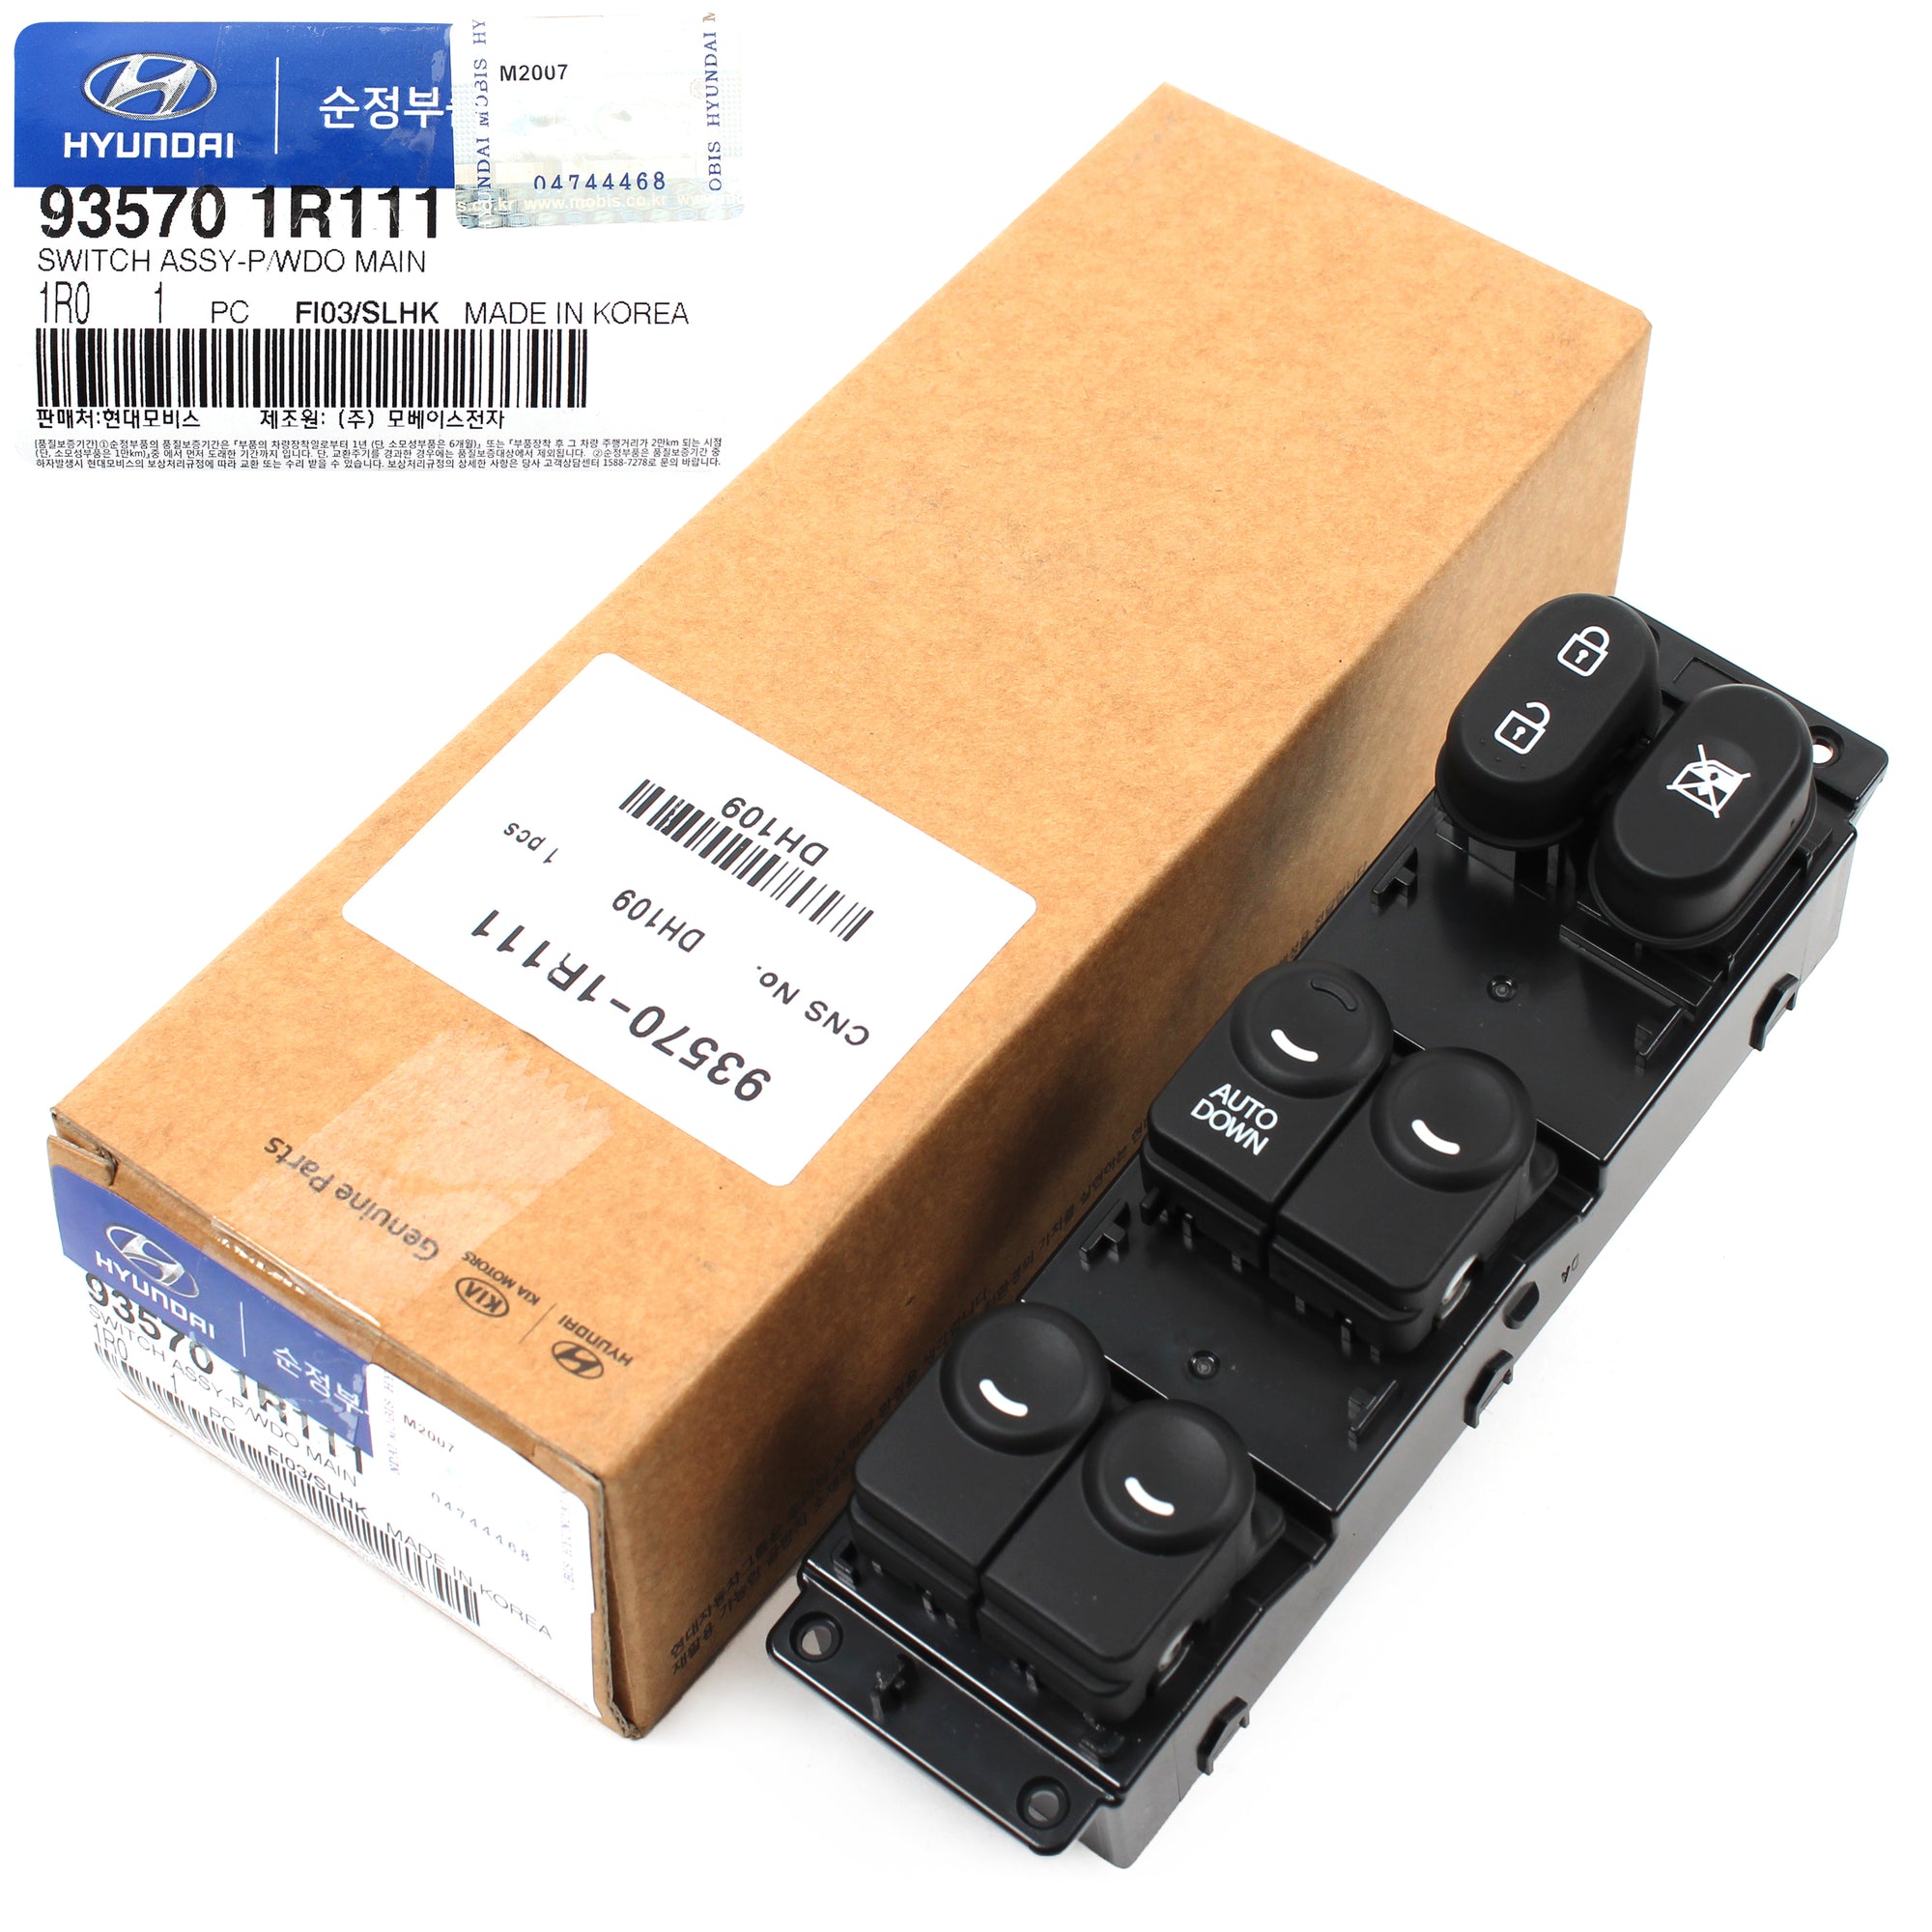 GENUNE Power Window Switch FRONT LEFT DRIVER for 12-17 Hyundai Accent 935701R111